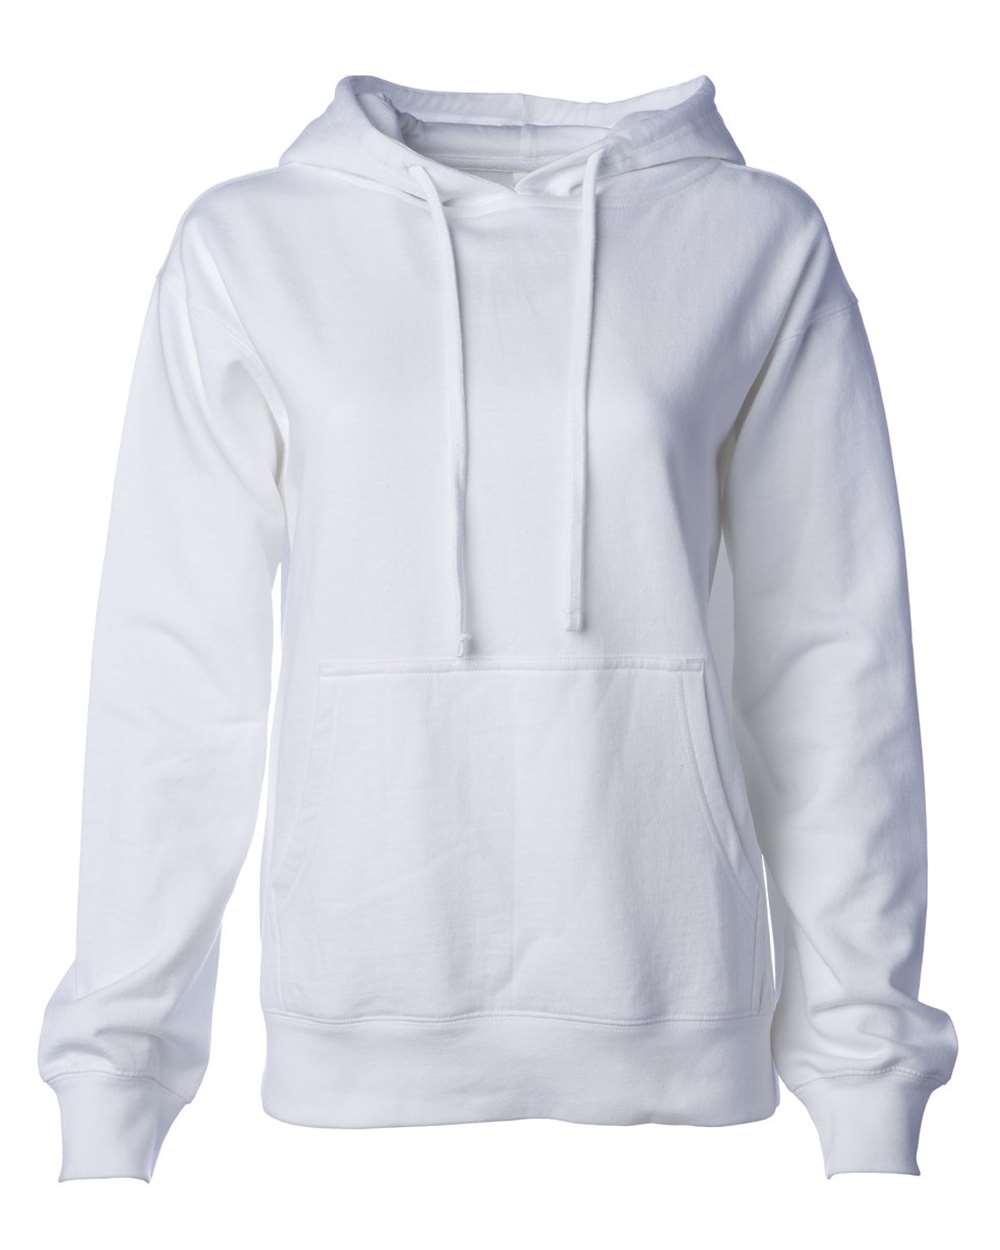 Independent Trading Co. - Women's Midweight Hooded Sweatshirt